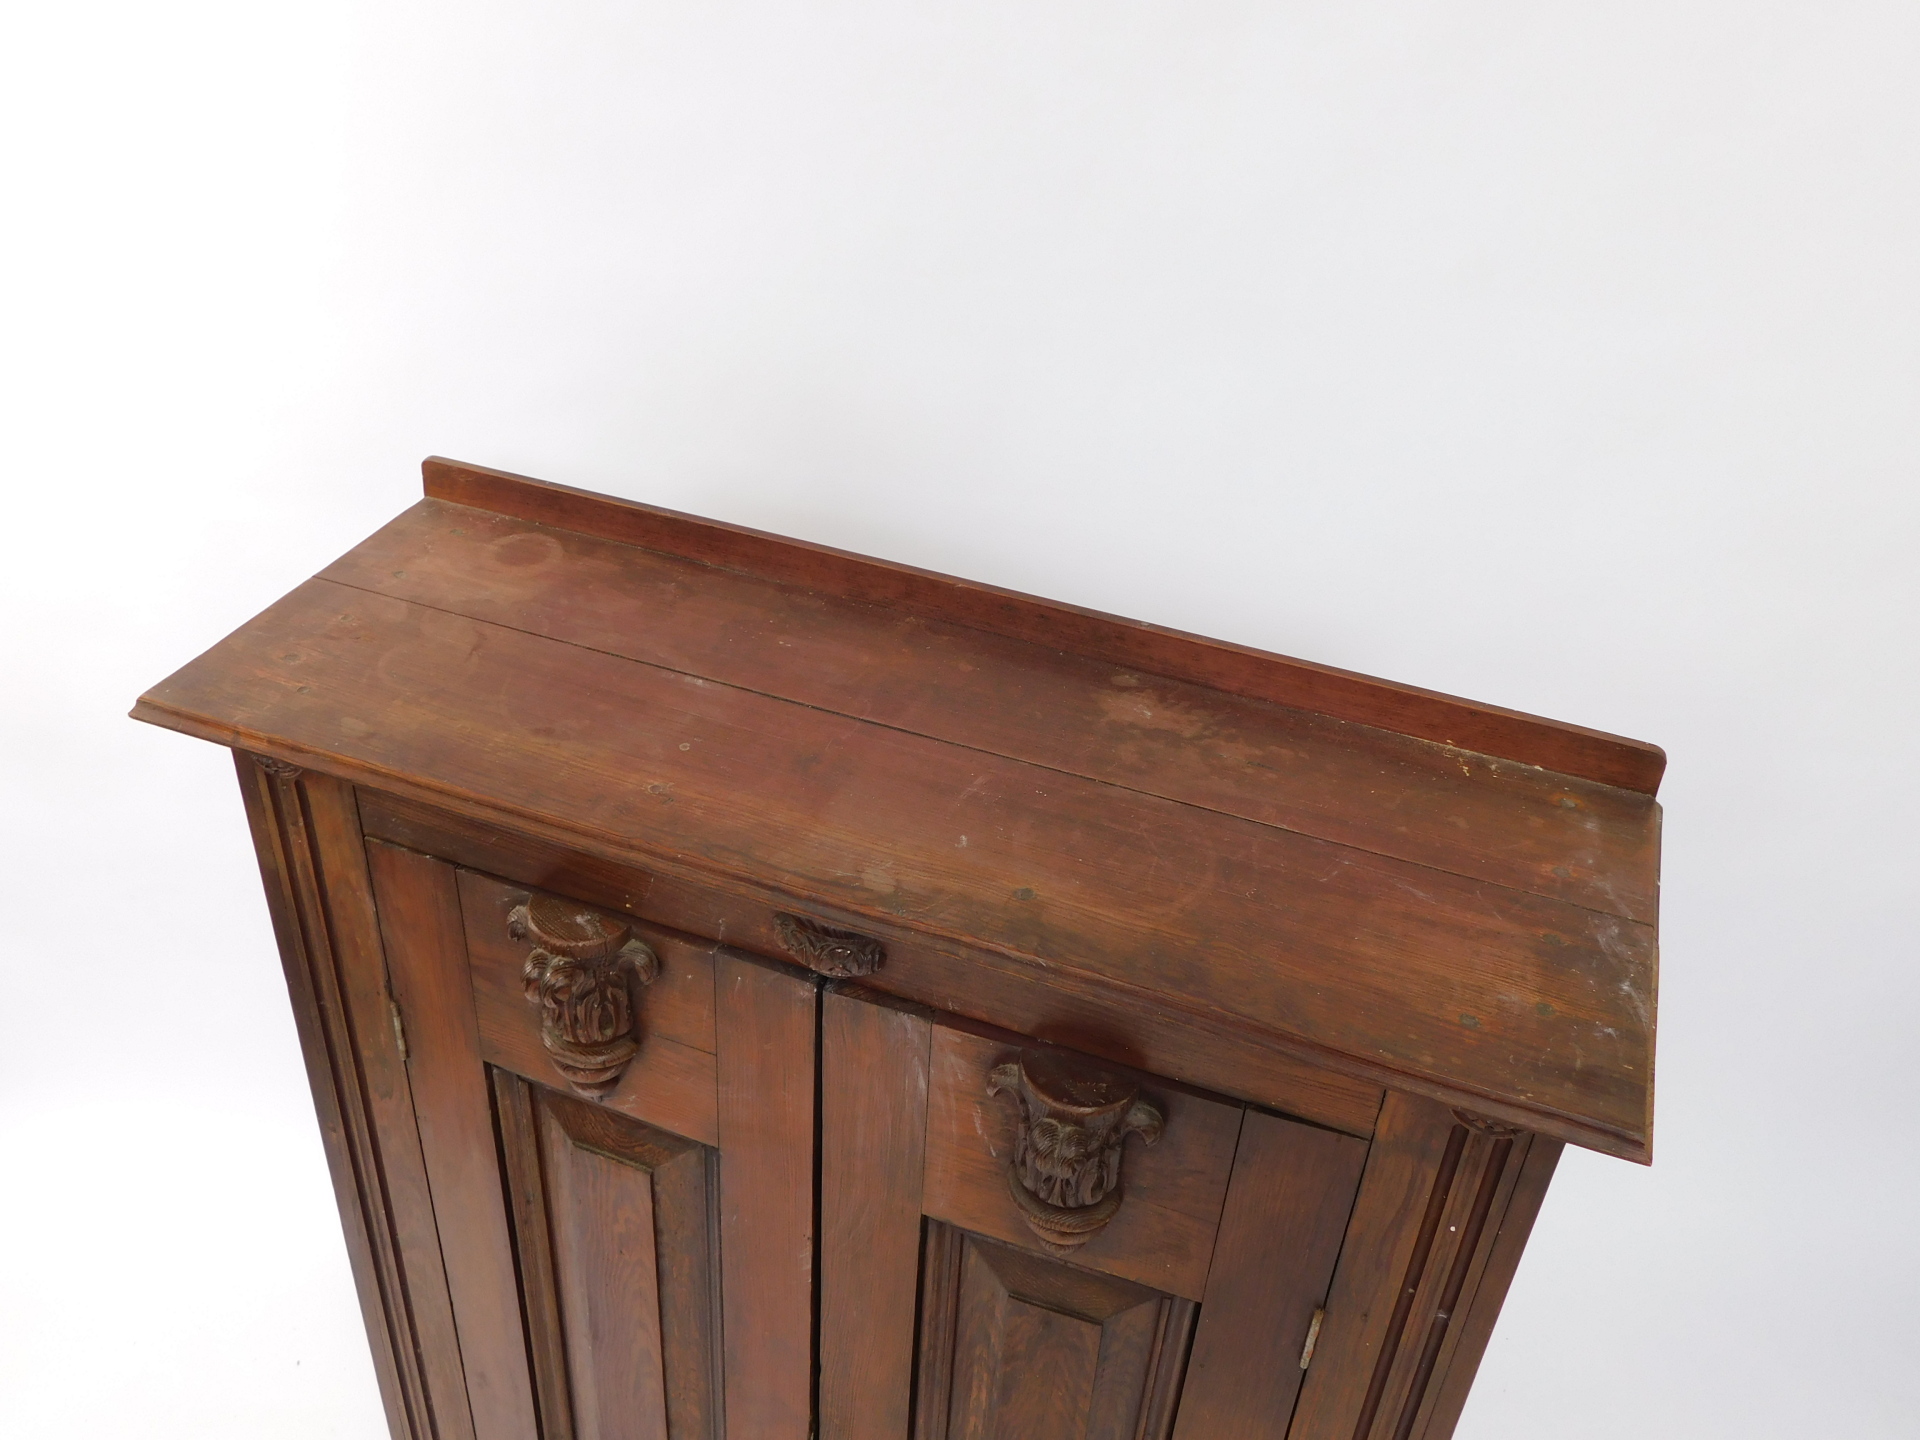 A 19thC ecclesiastical style pine vestment type cupboard, with carved semi circle acanthus leaf moul - Image 2 of 3